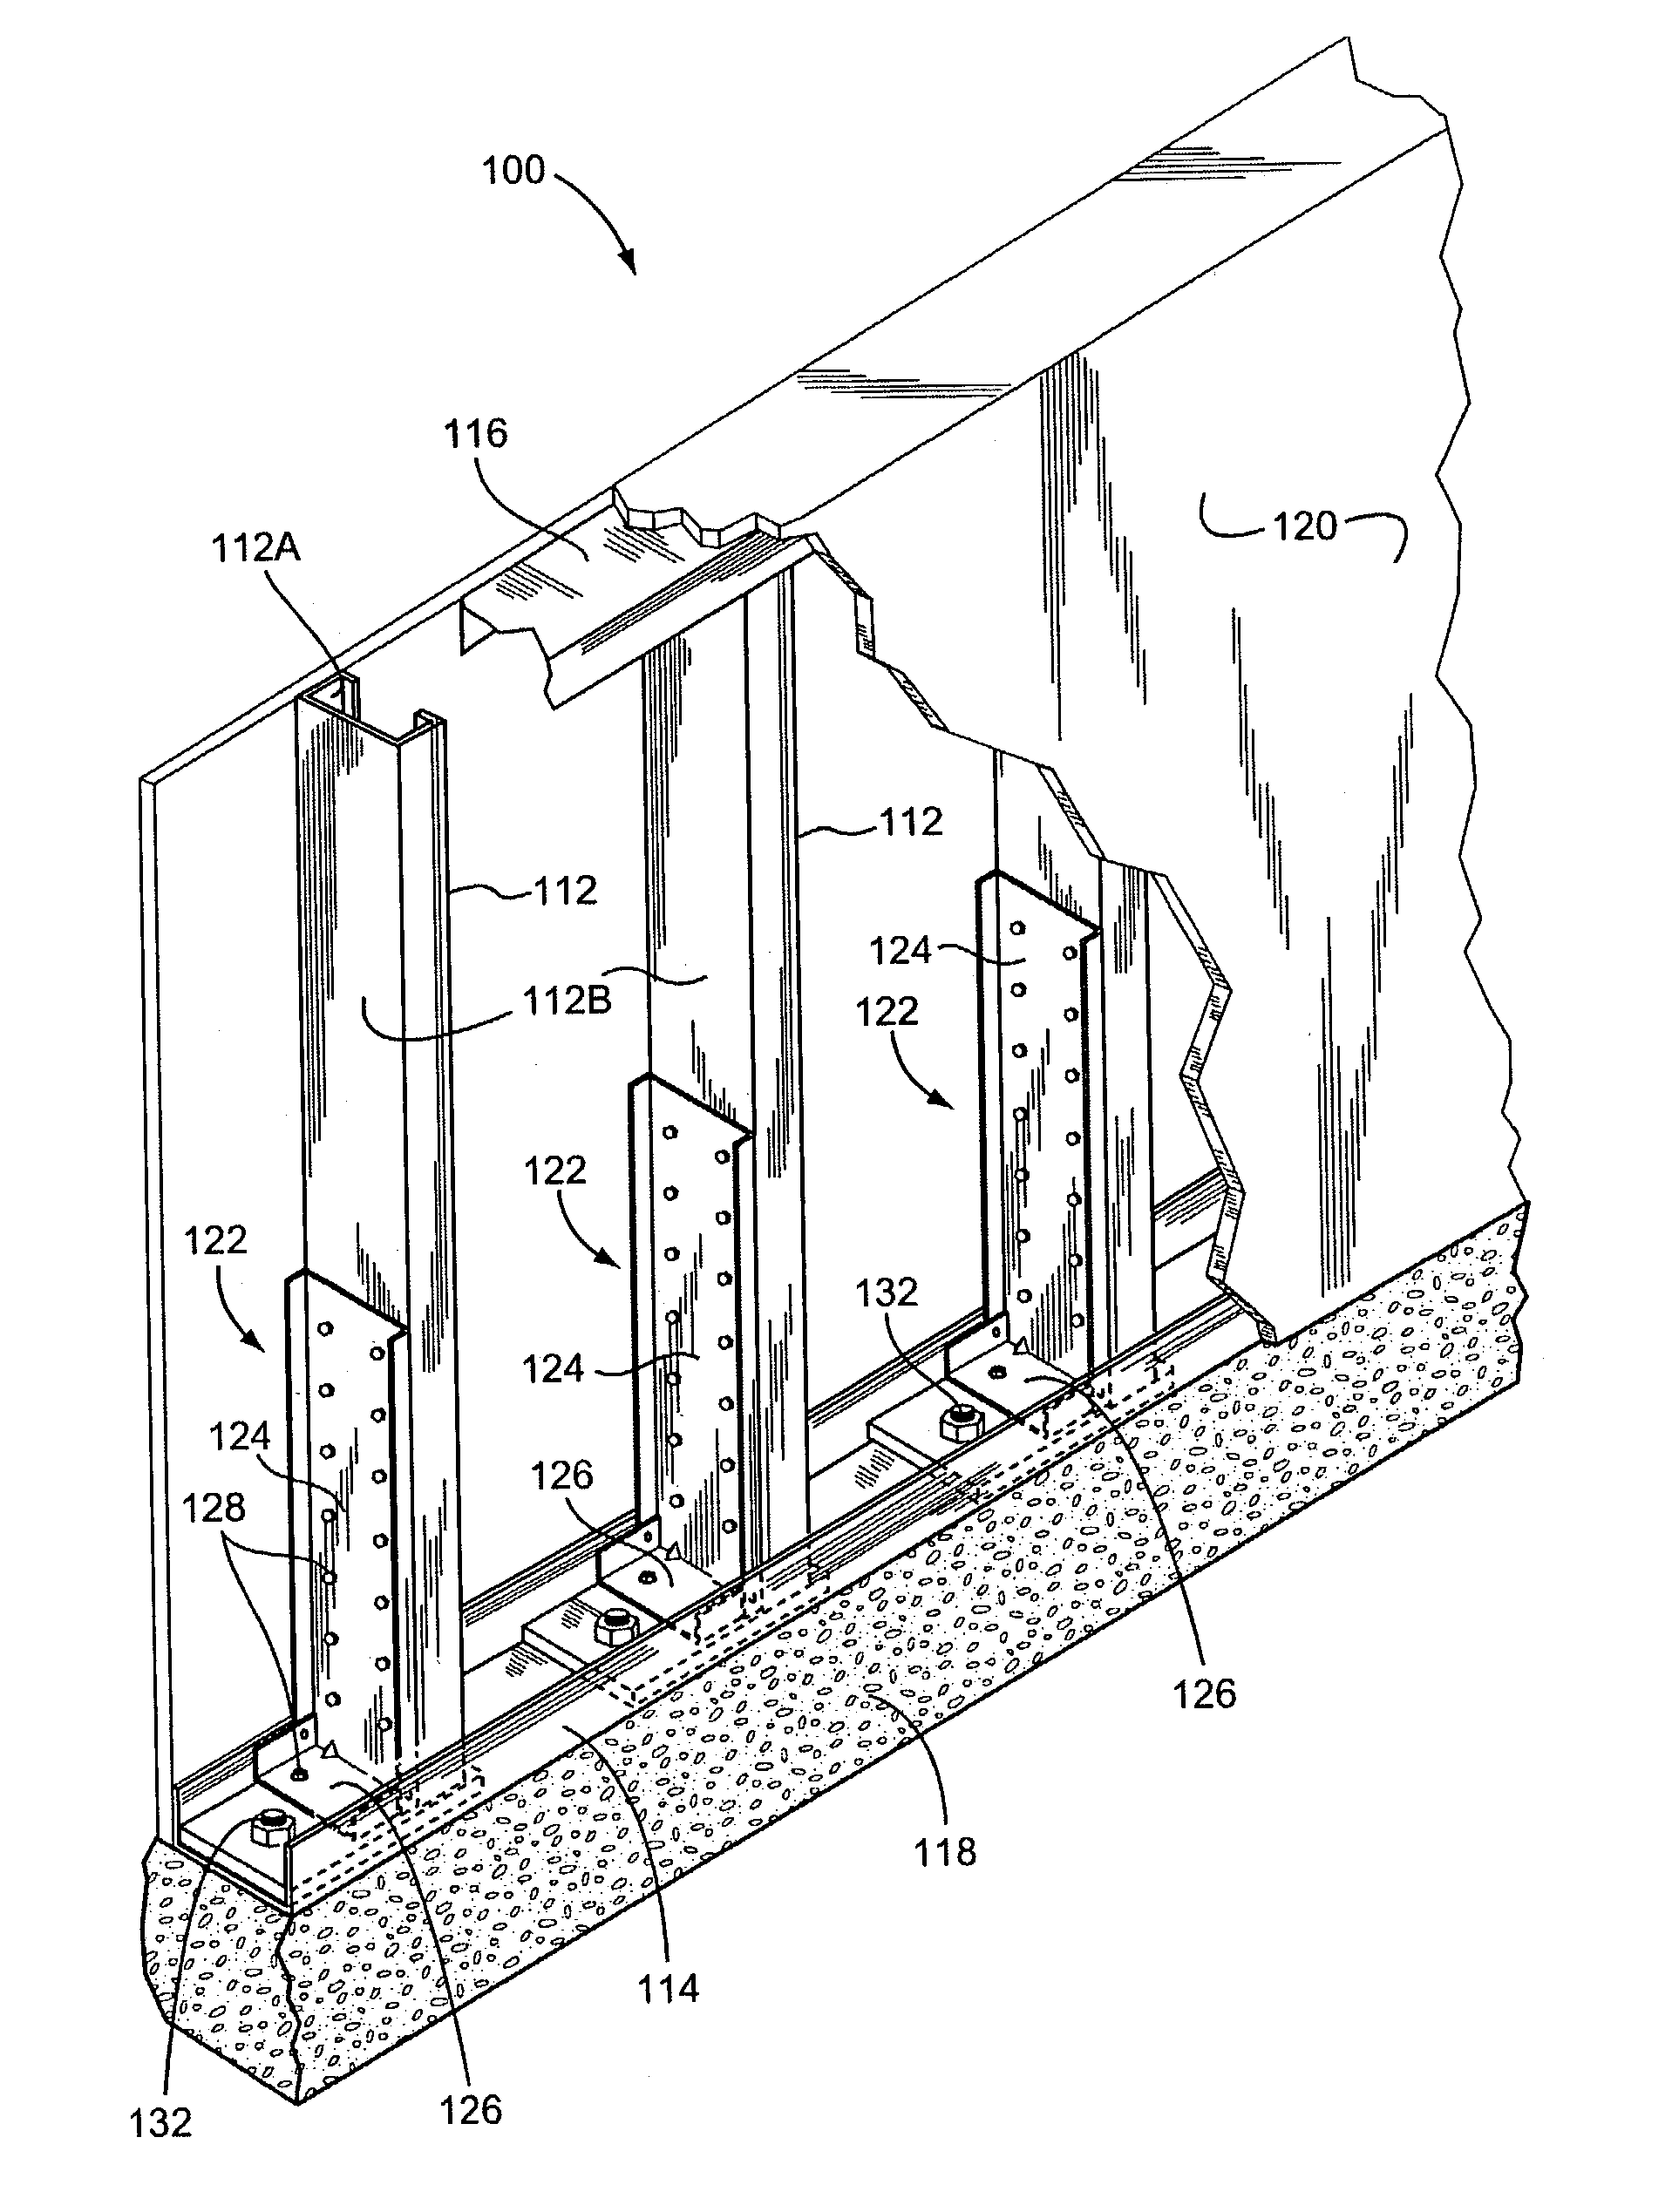 Metal half wall and a connector assembly for securing studs of a half wall to an underlying support structure